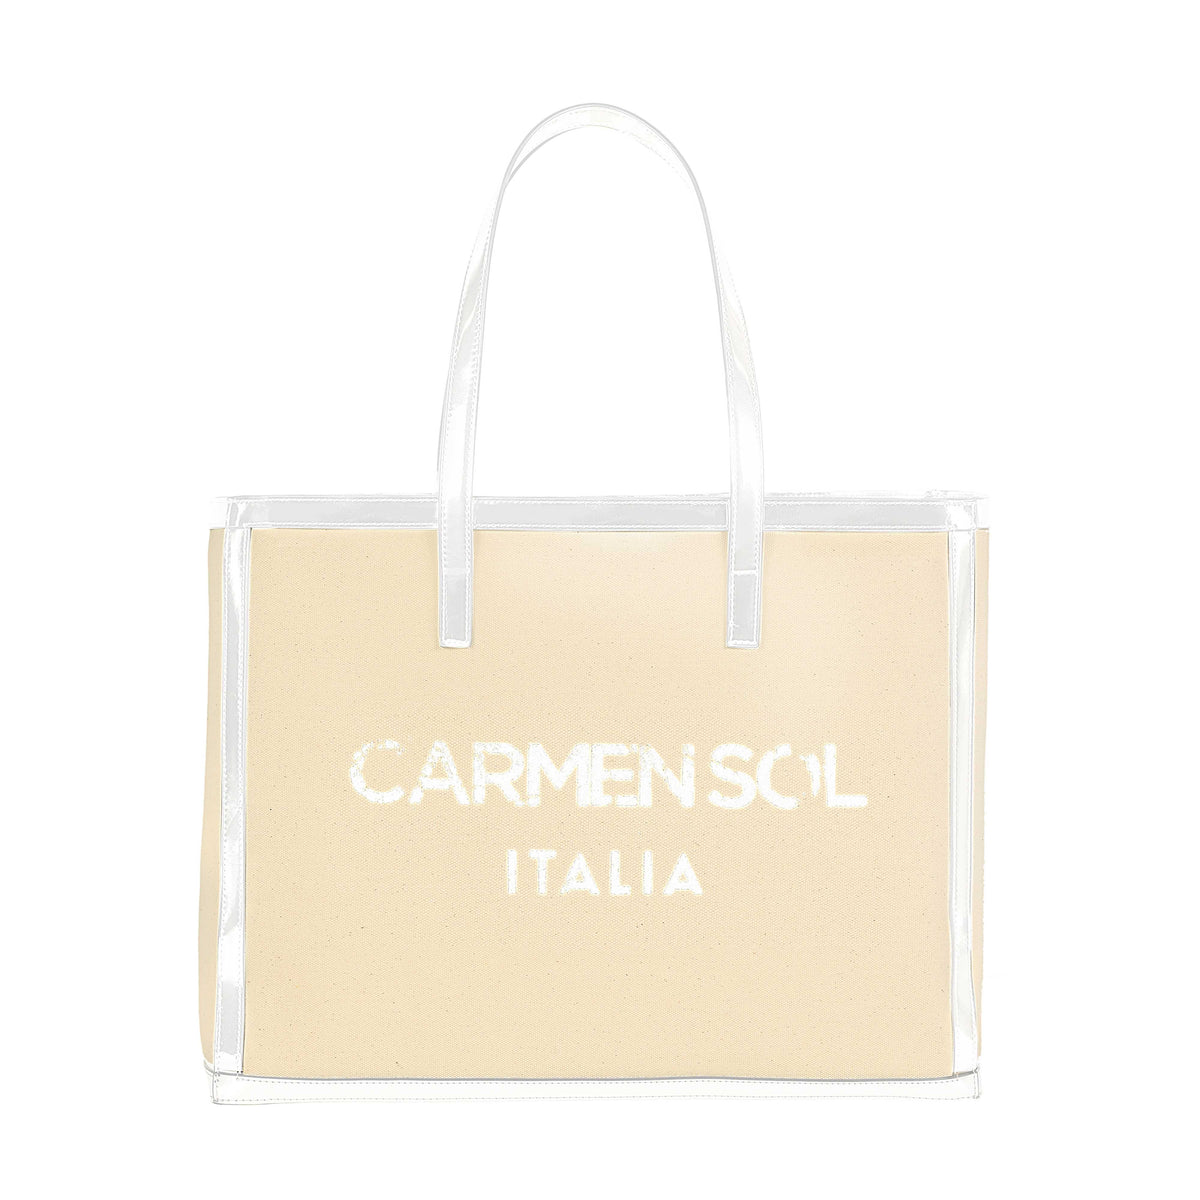 Made in Italy large tote bag in color white